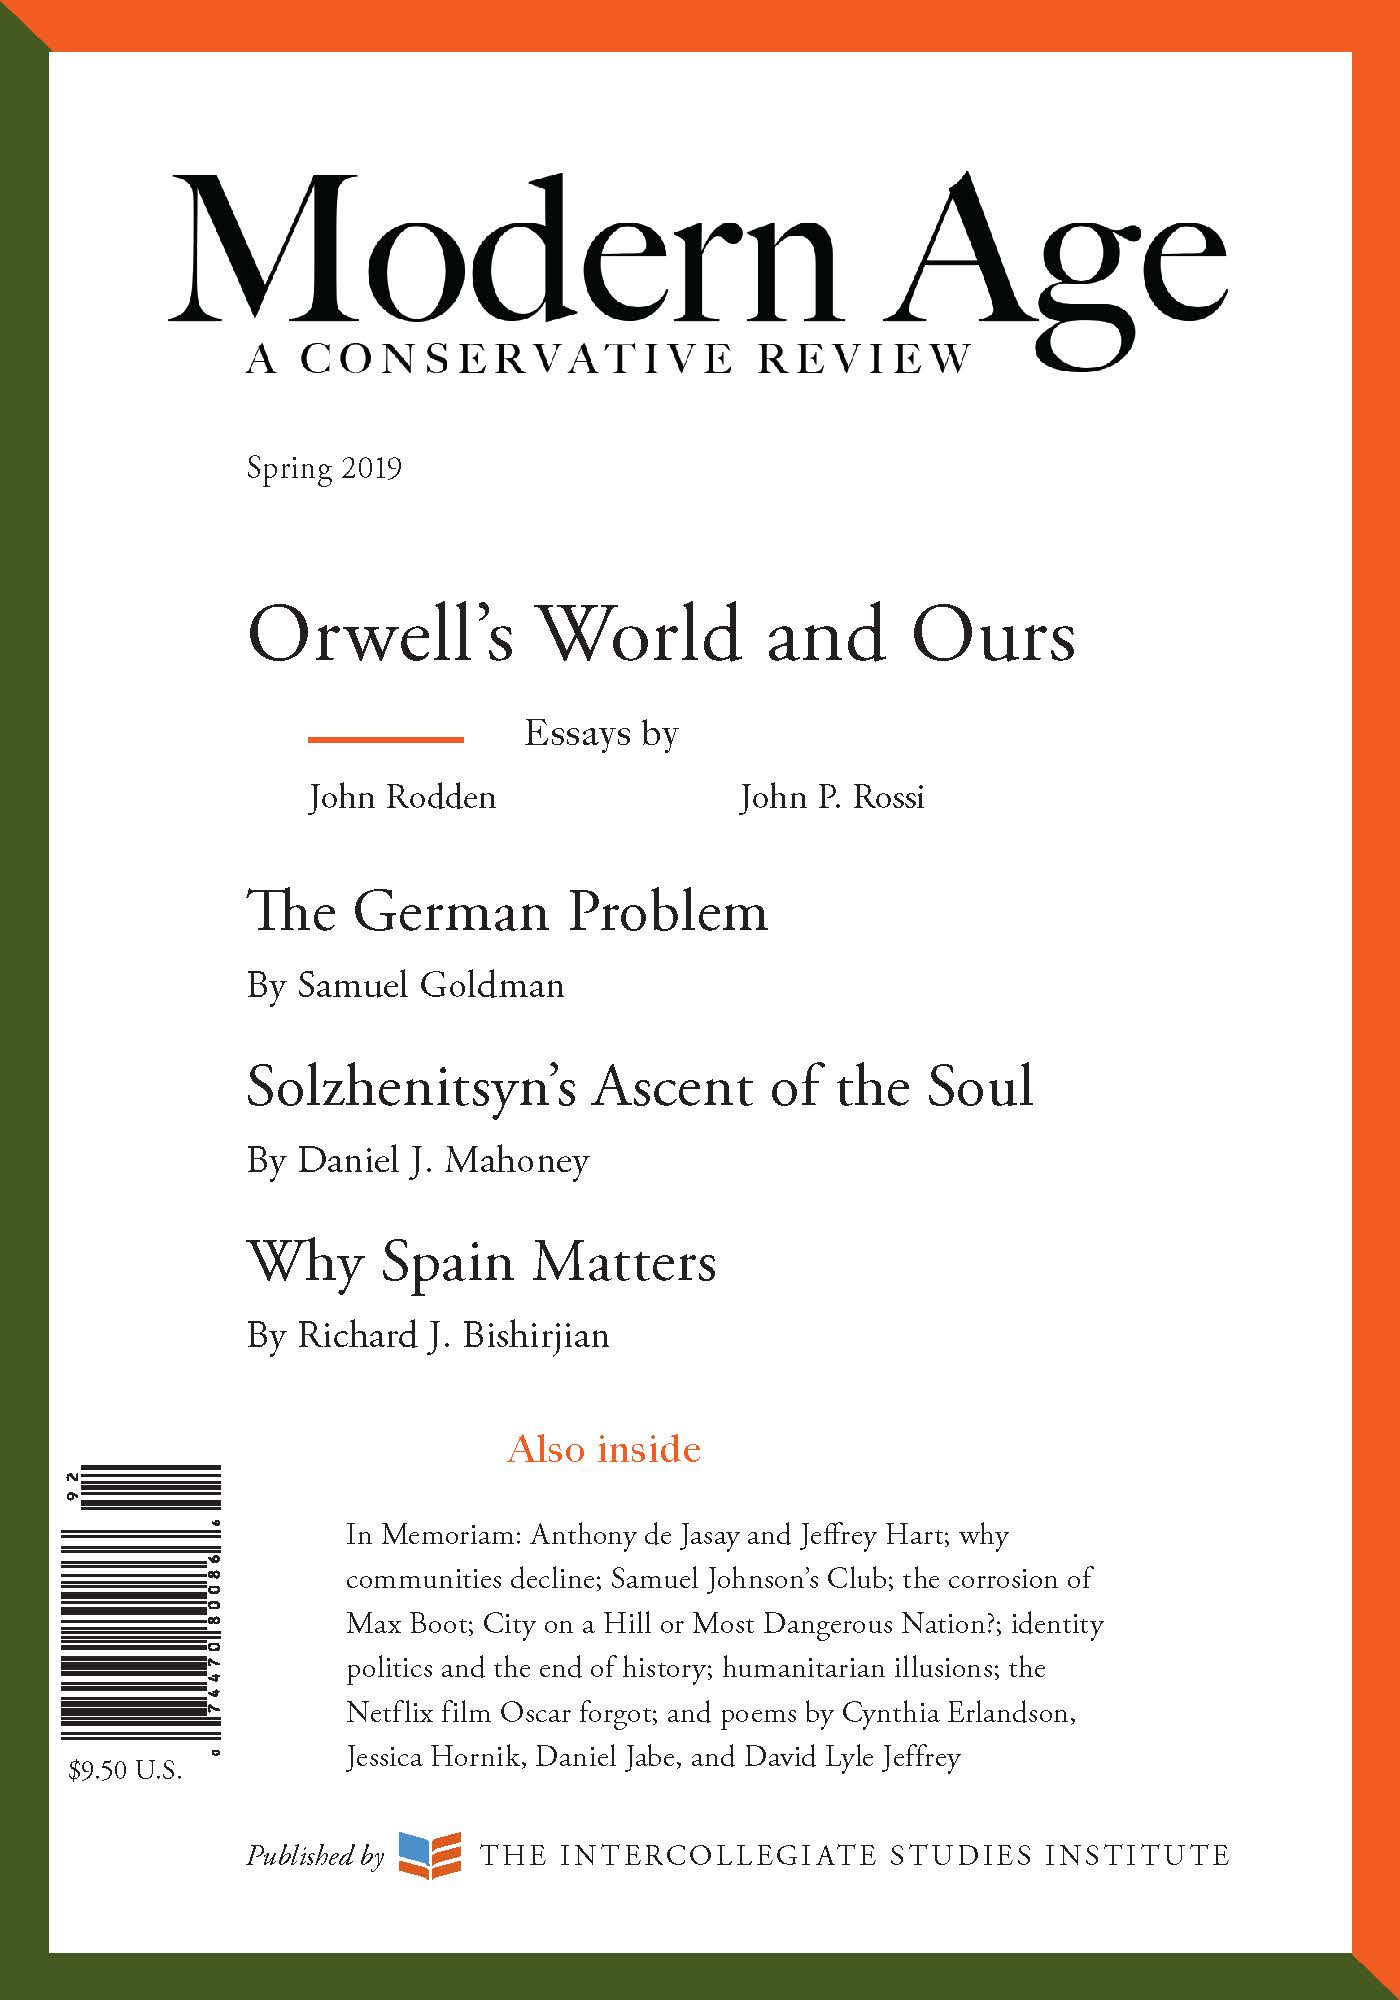 Spring 2019 Cover Image